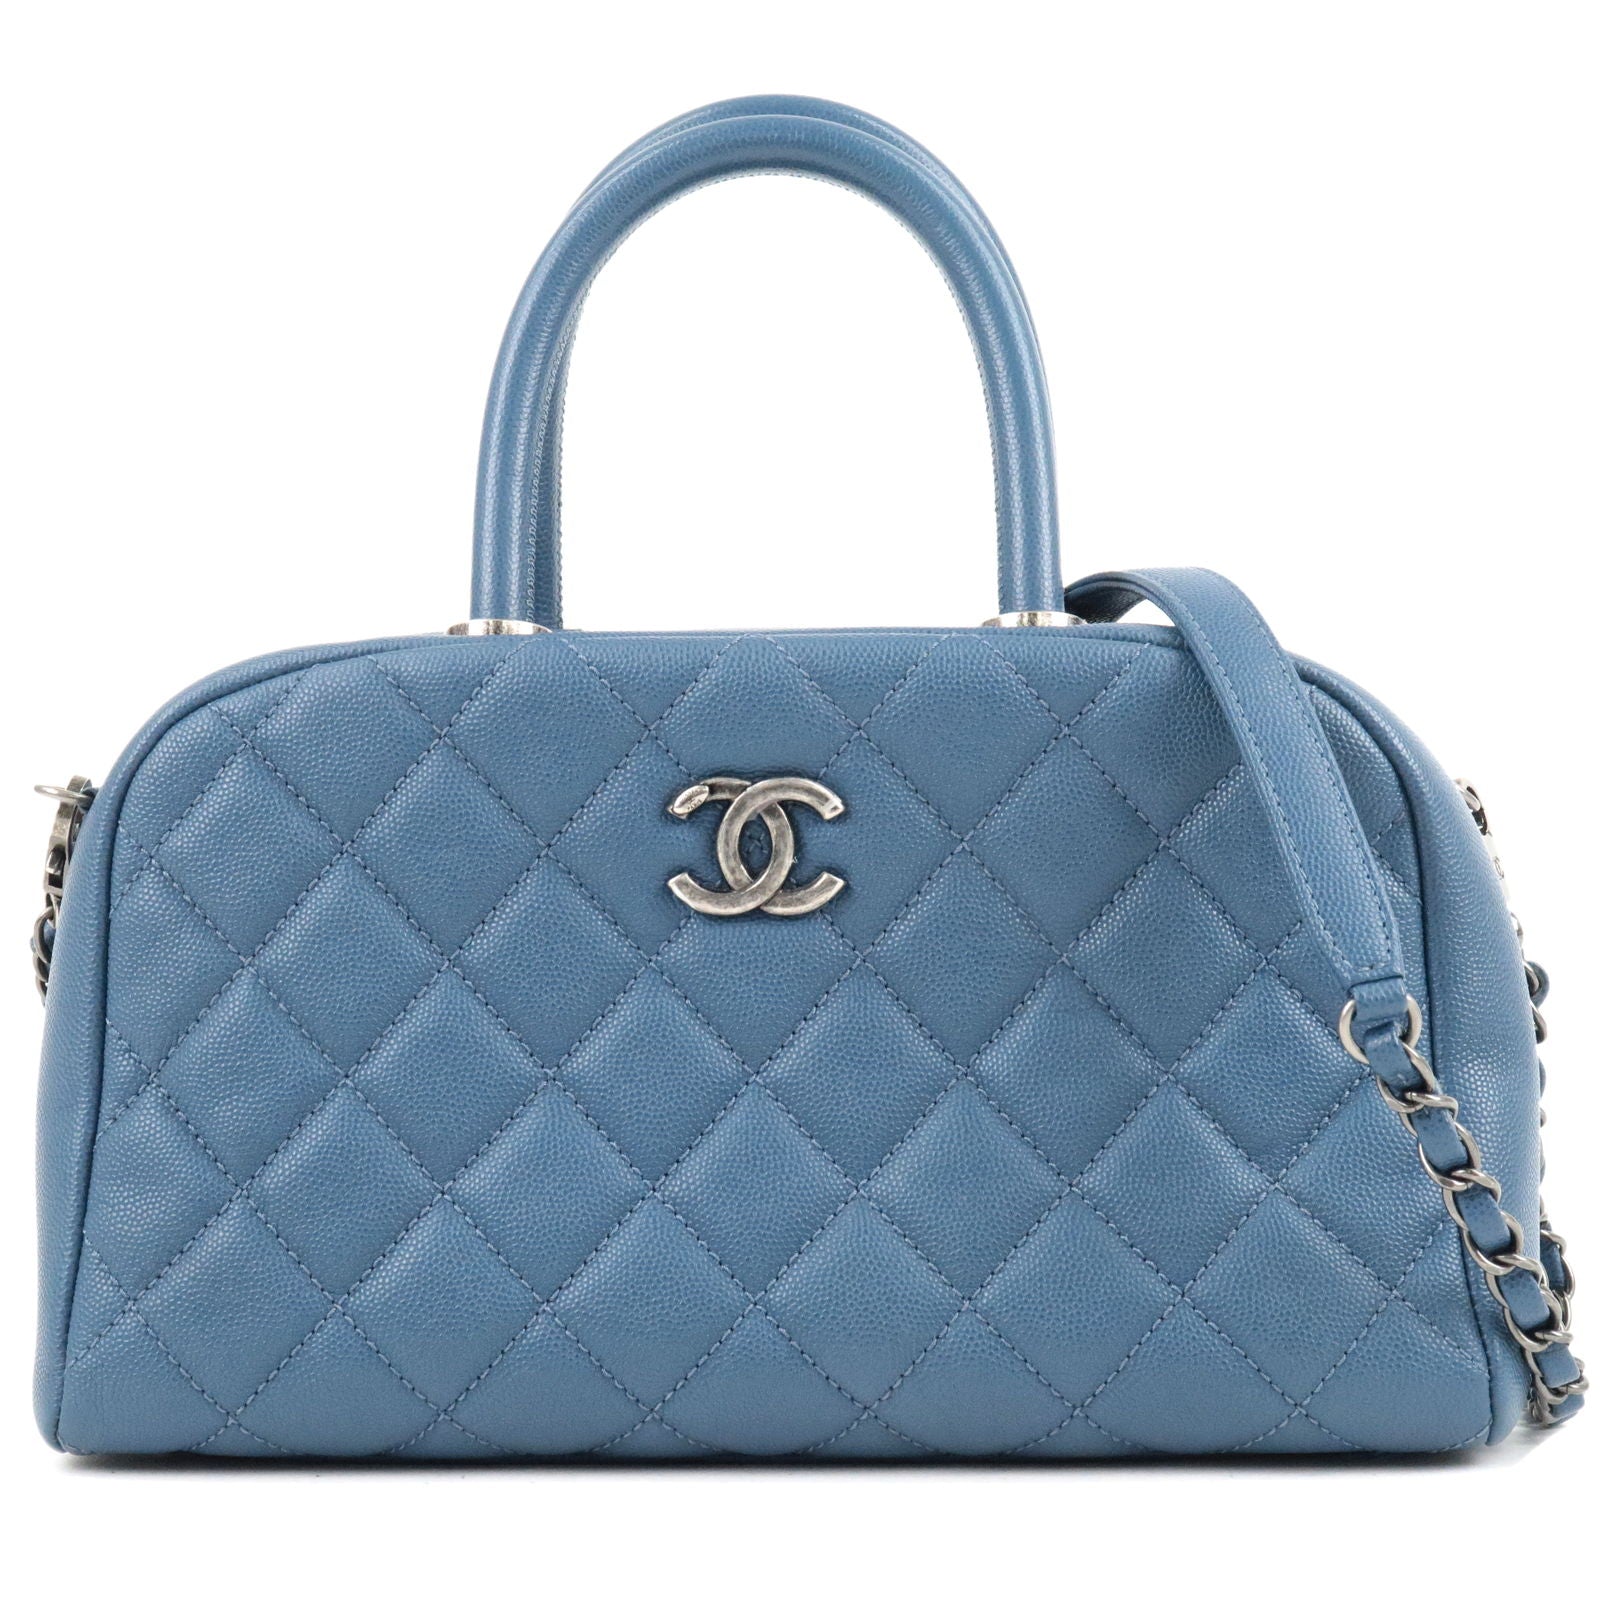 Bonhams : Channel Princess Diana's Style with Vintage Chanel at